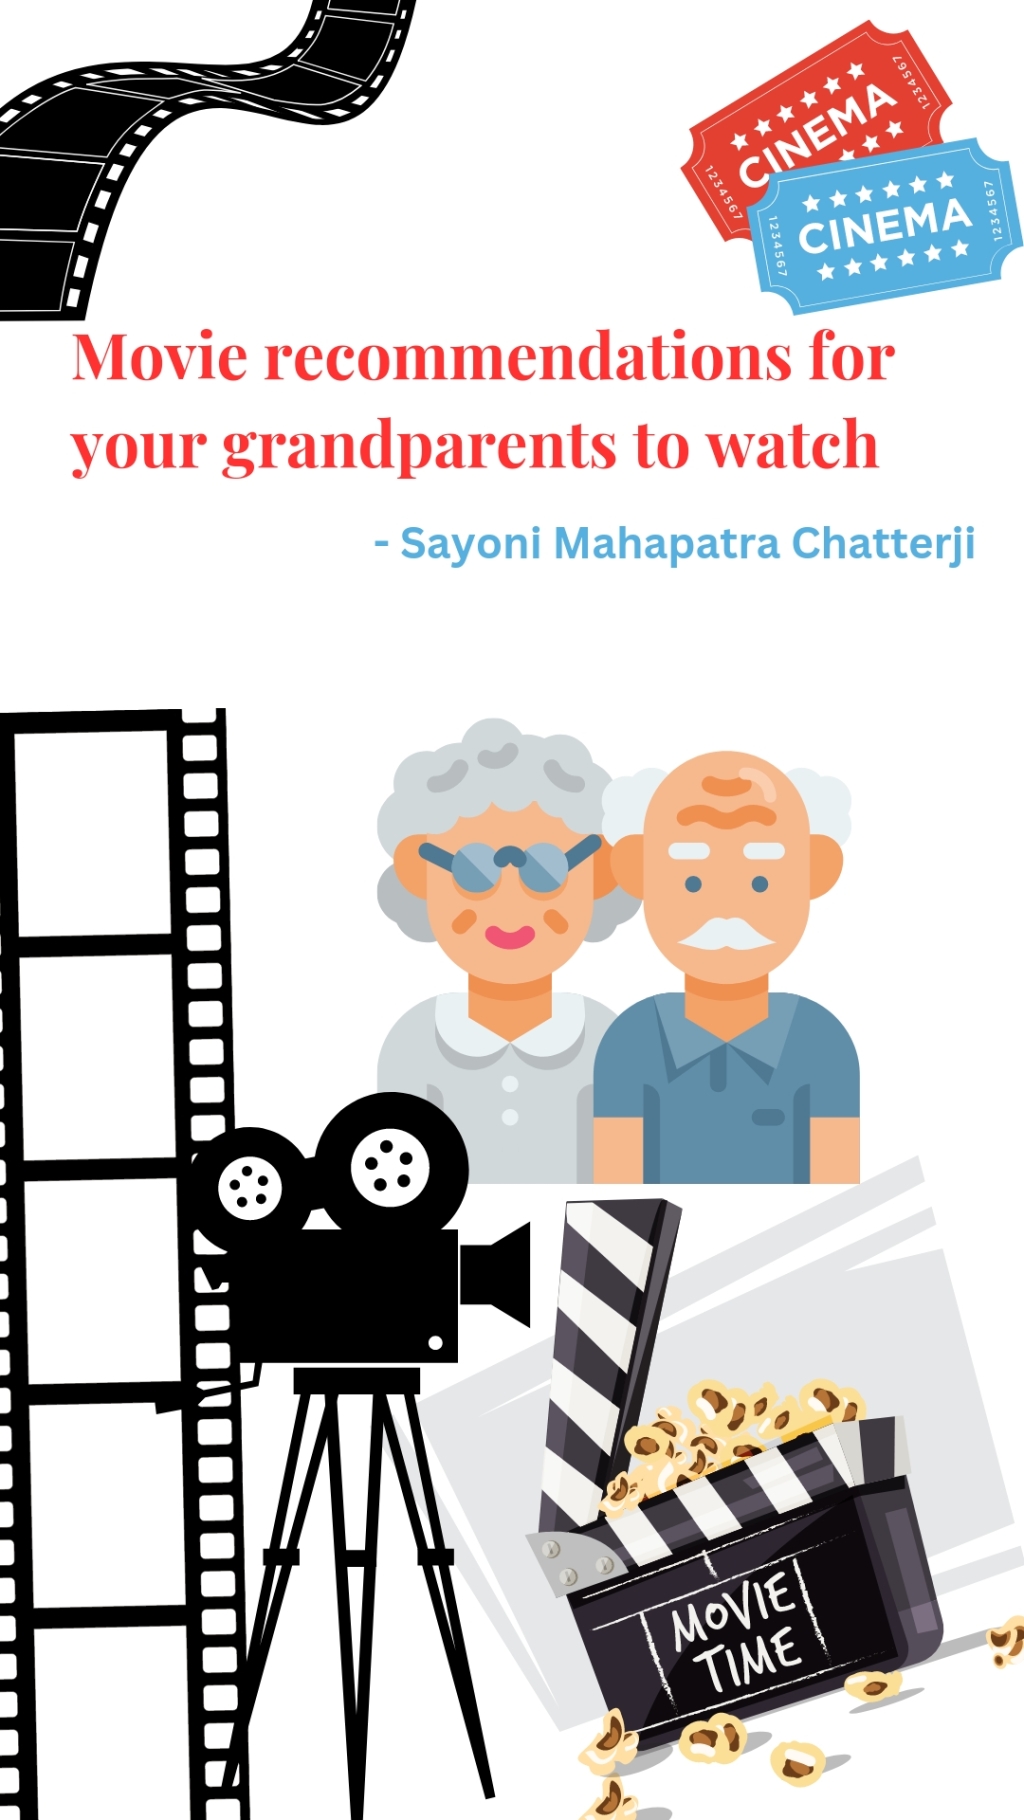 Movie recommendations for your grandparents to watch